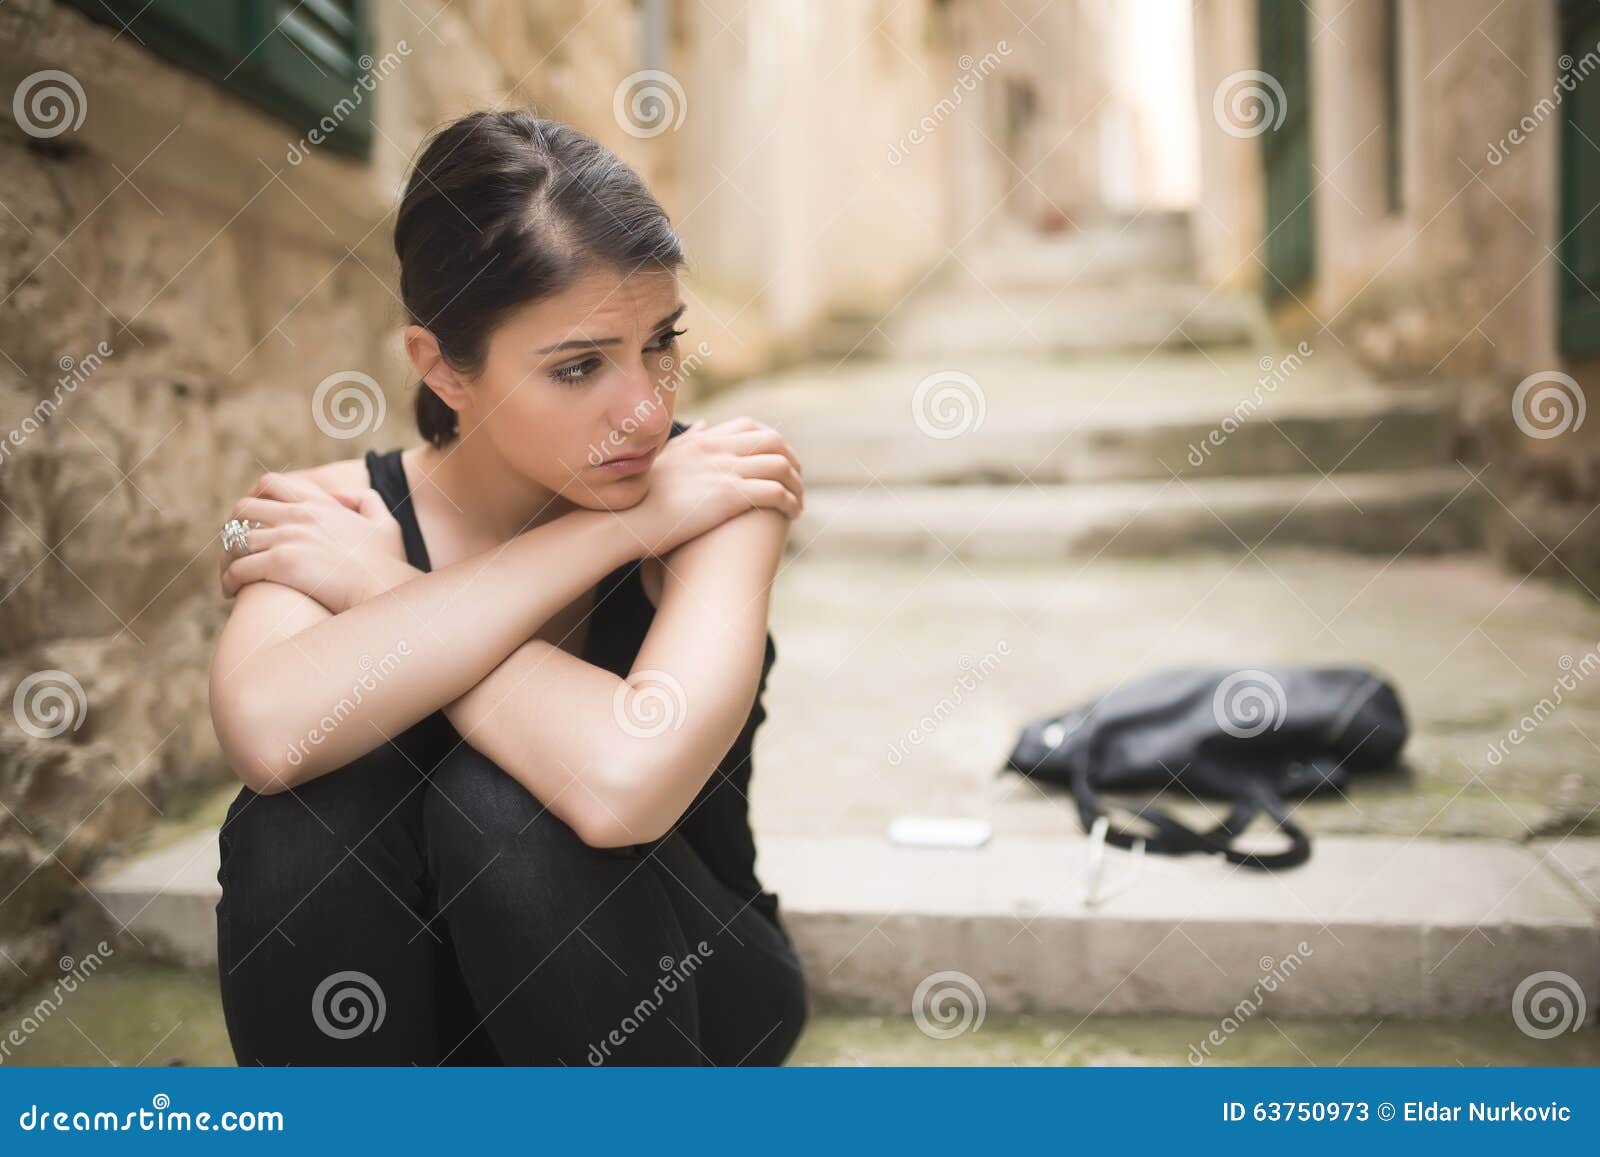 woman with sad face crying.sad expression,sad emotion,despair,sadness.woman in emotional stress and pain.